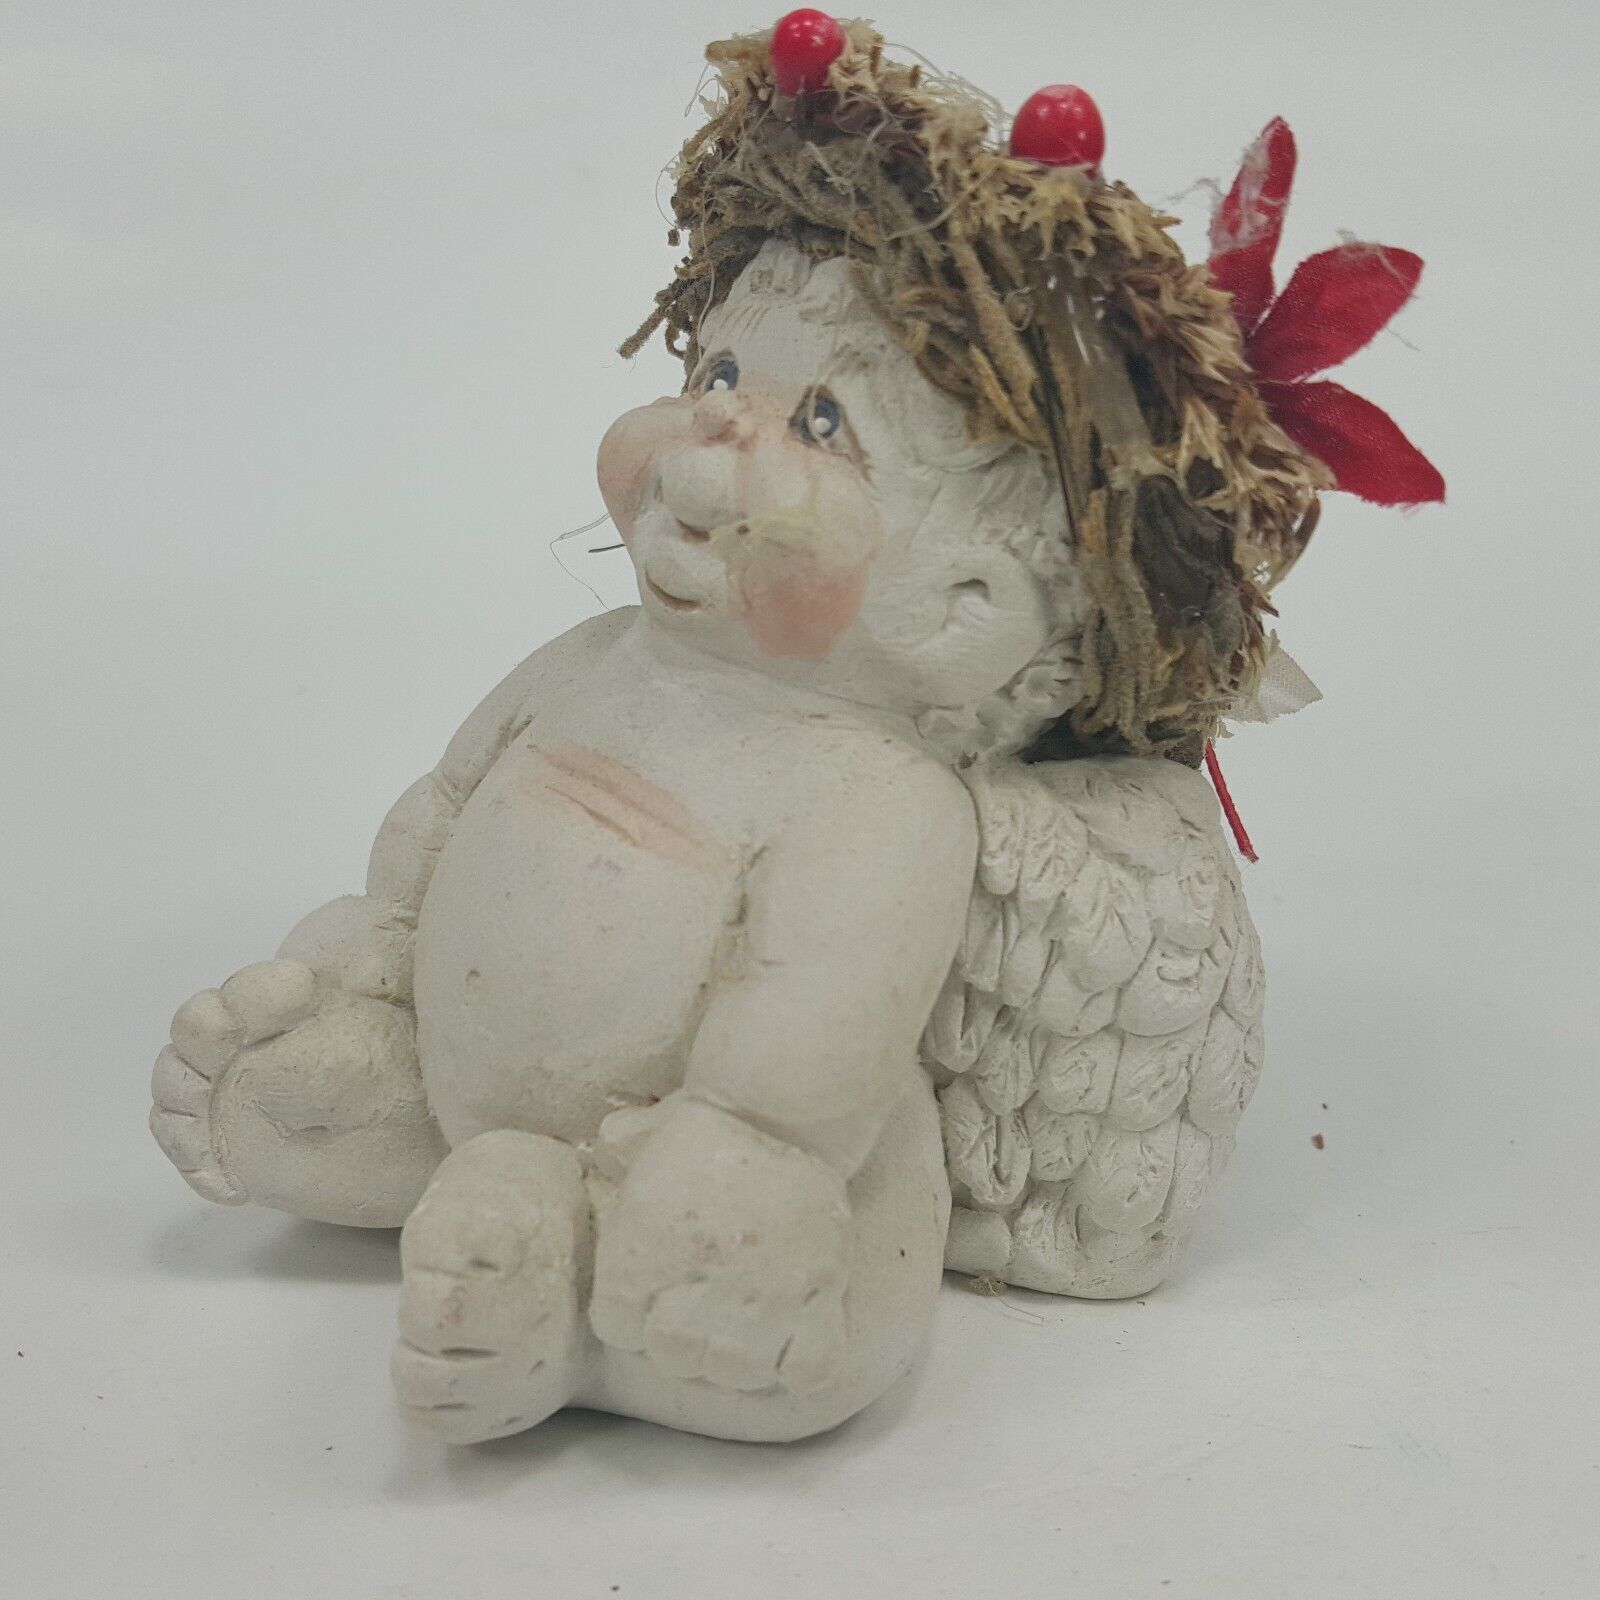 Primary image for Cast Art Dreamsicles Cherub by Kristen 1991 with Red Halo - 3" tall - WLHJB